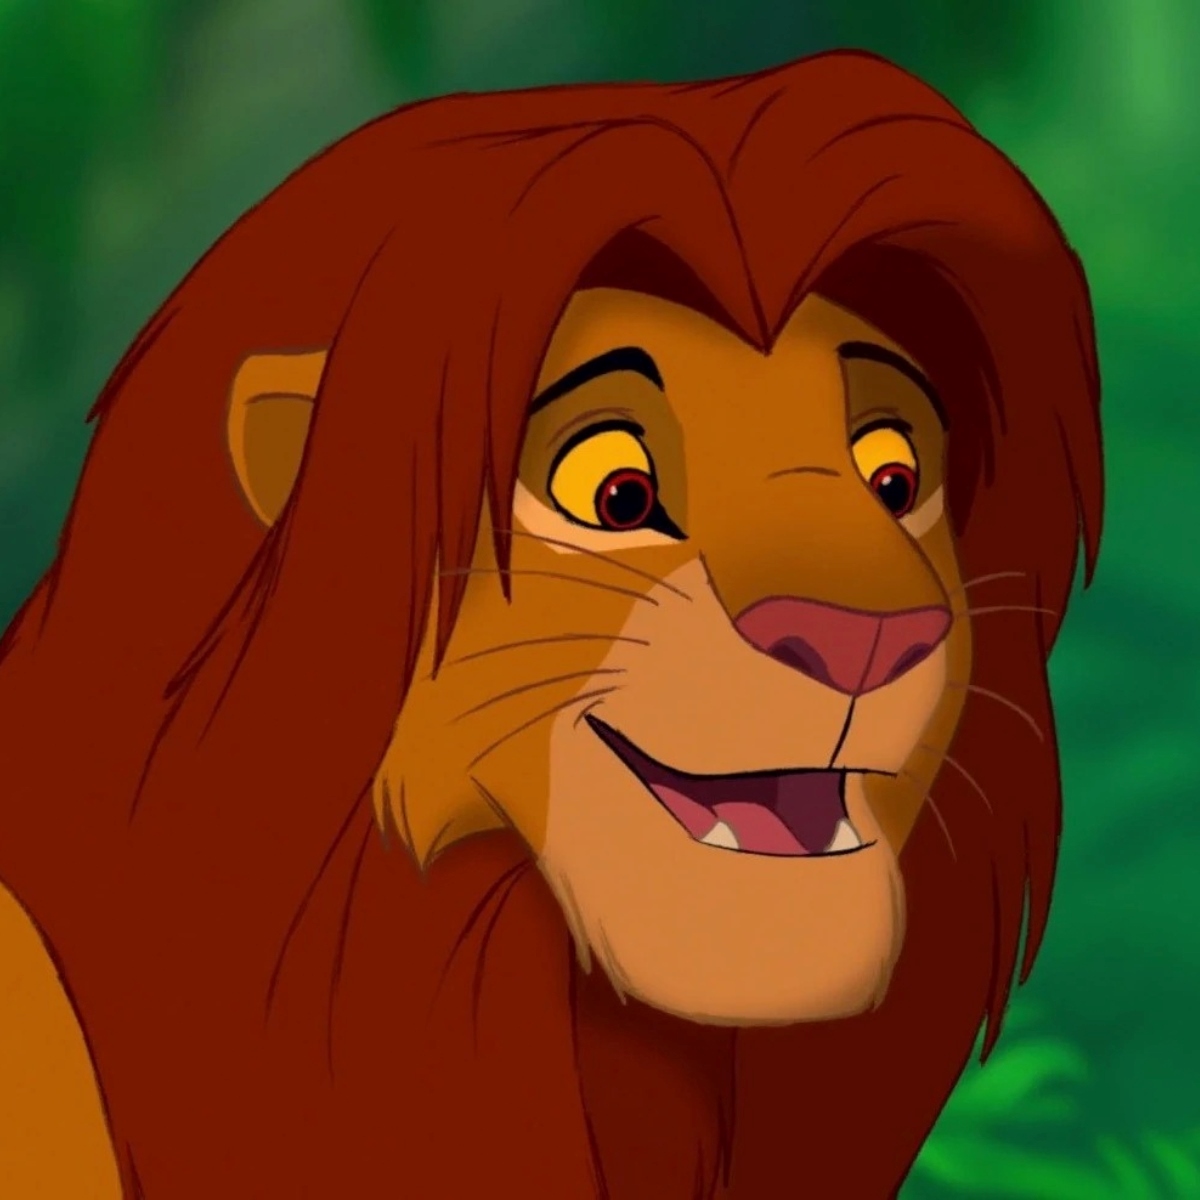 23 Facts About Simba (The Lion King) - Facts.net